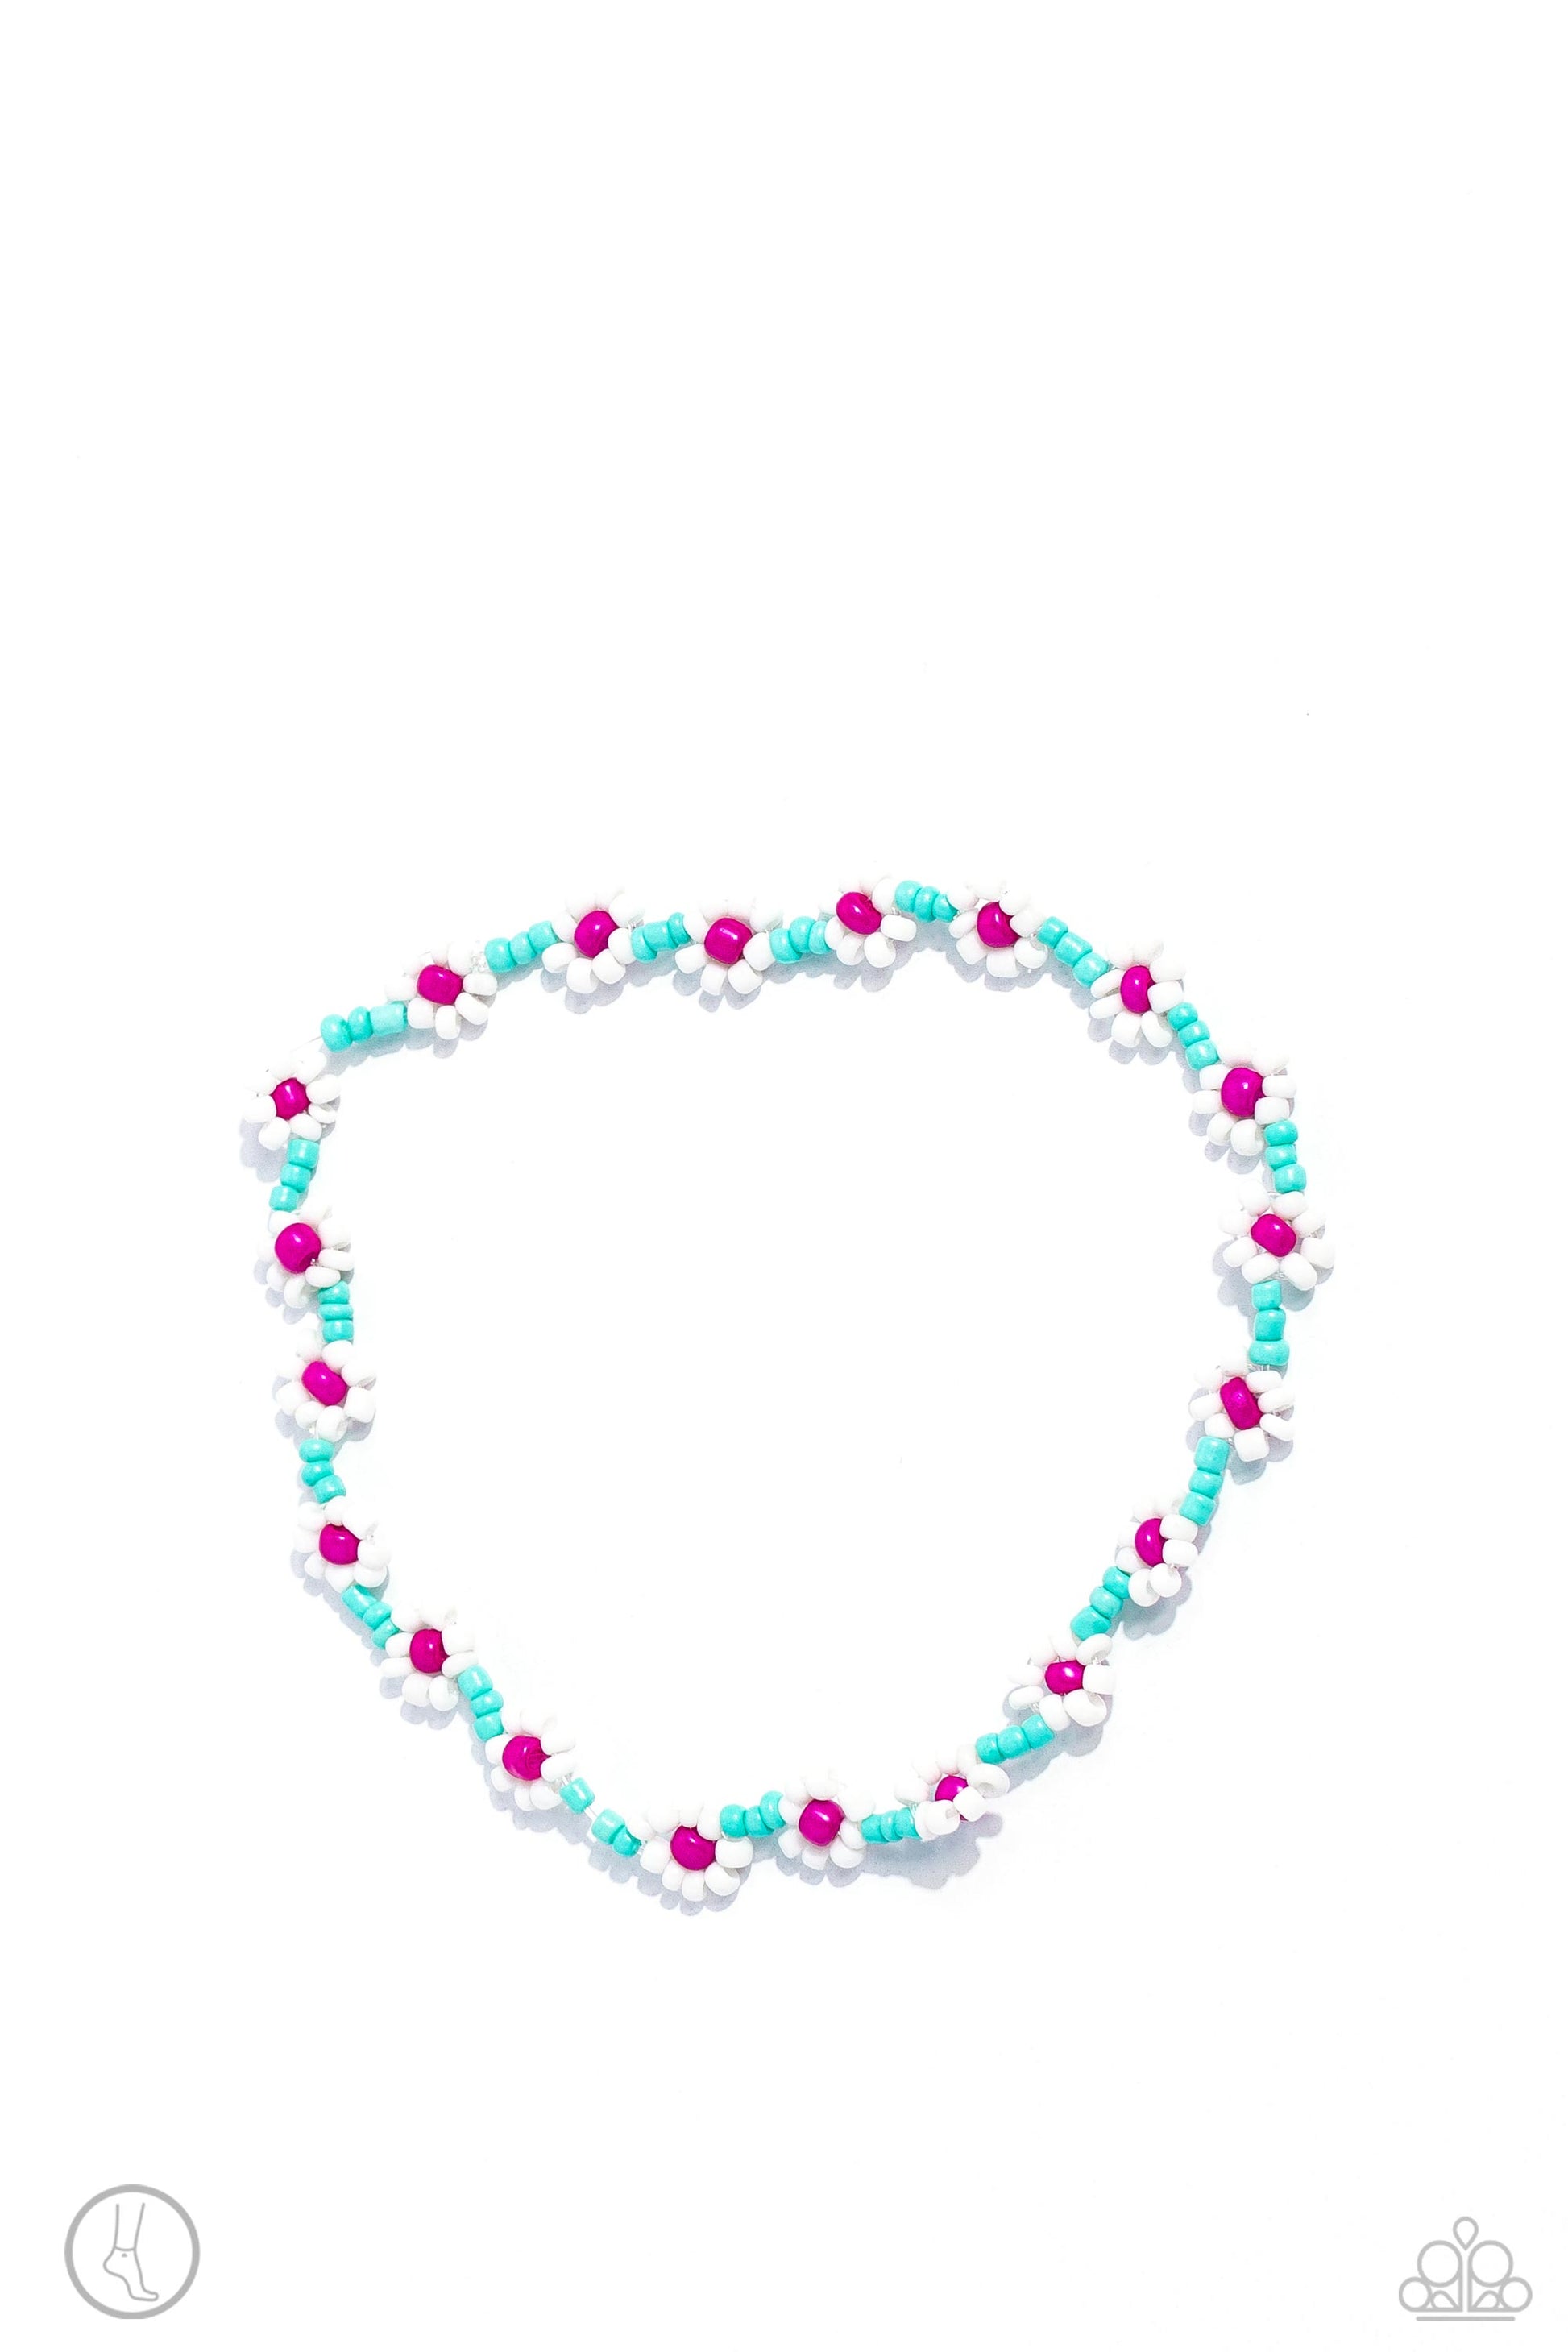 Midsummer Daisy Blue Anklet - Paparazzi Accessories